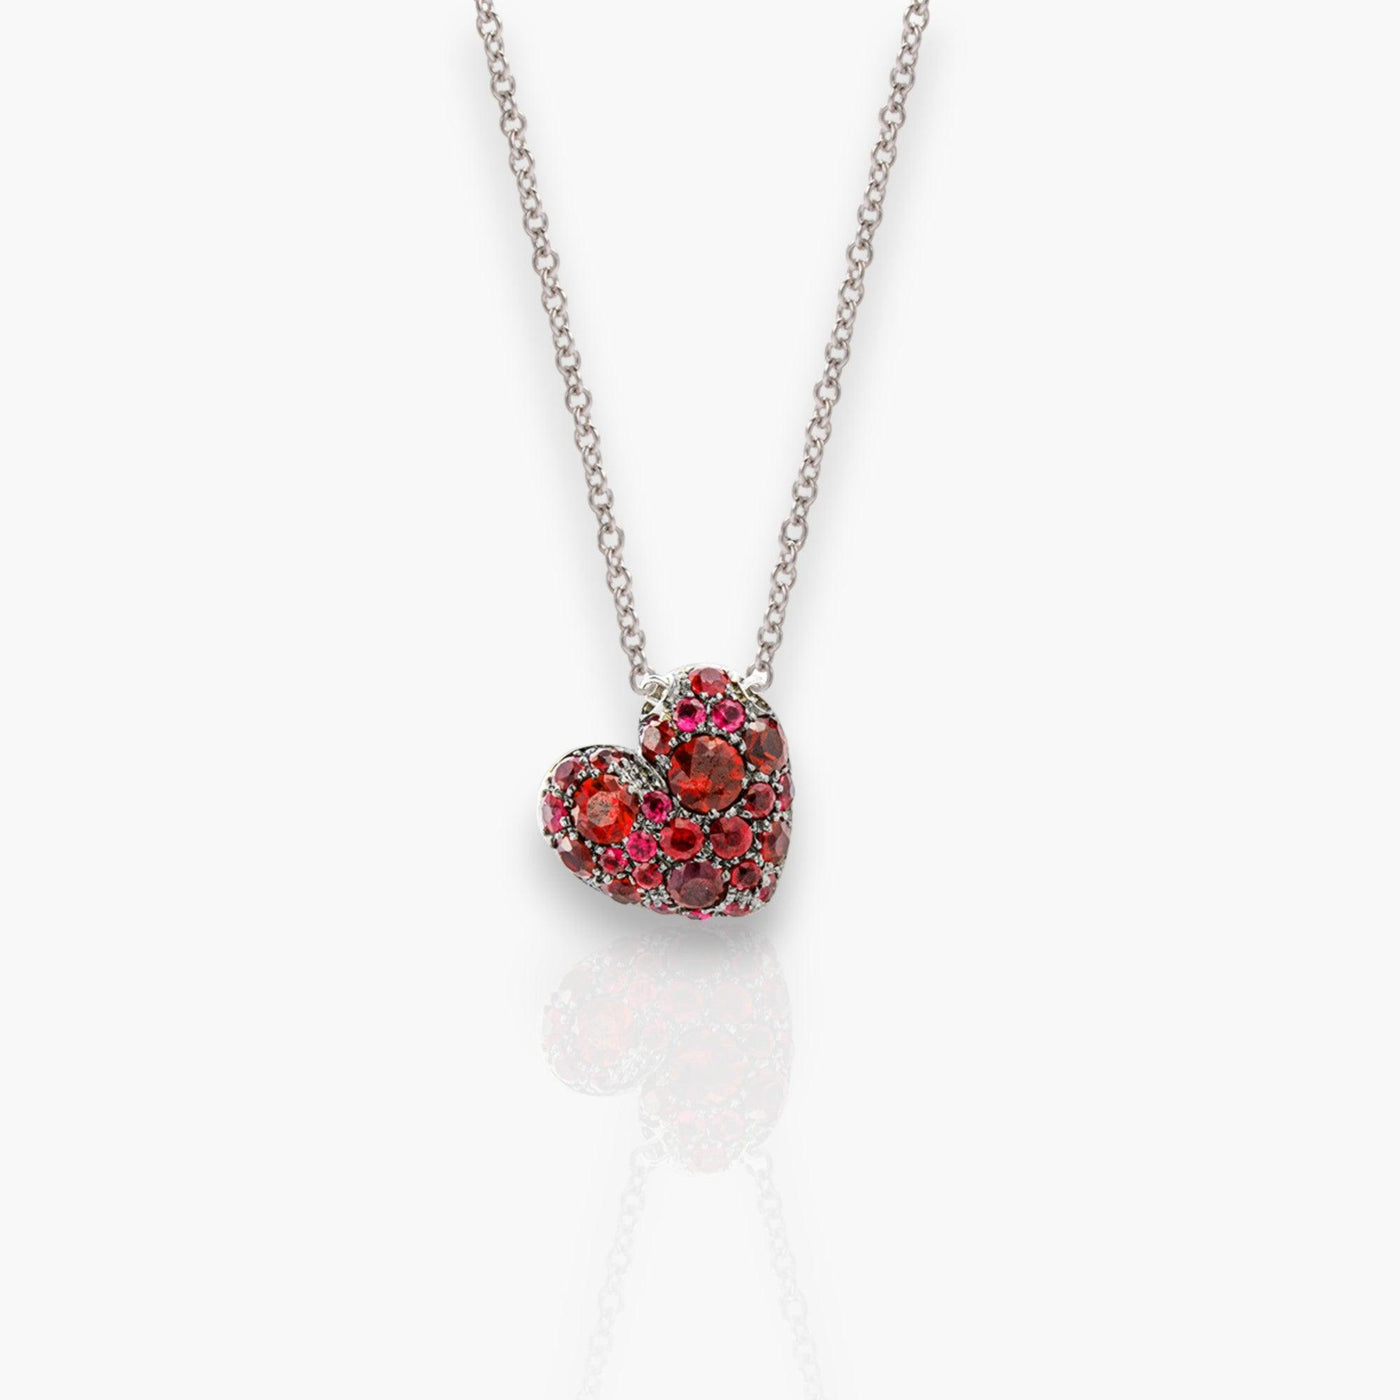 Ruby Heart Necklace - Moregola Fine Jewelry